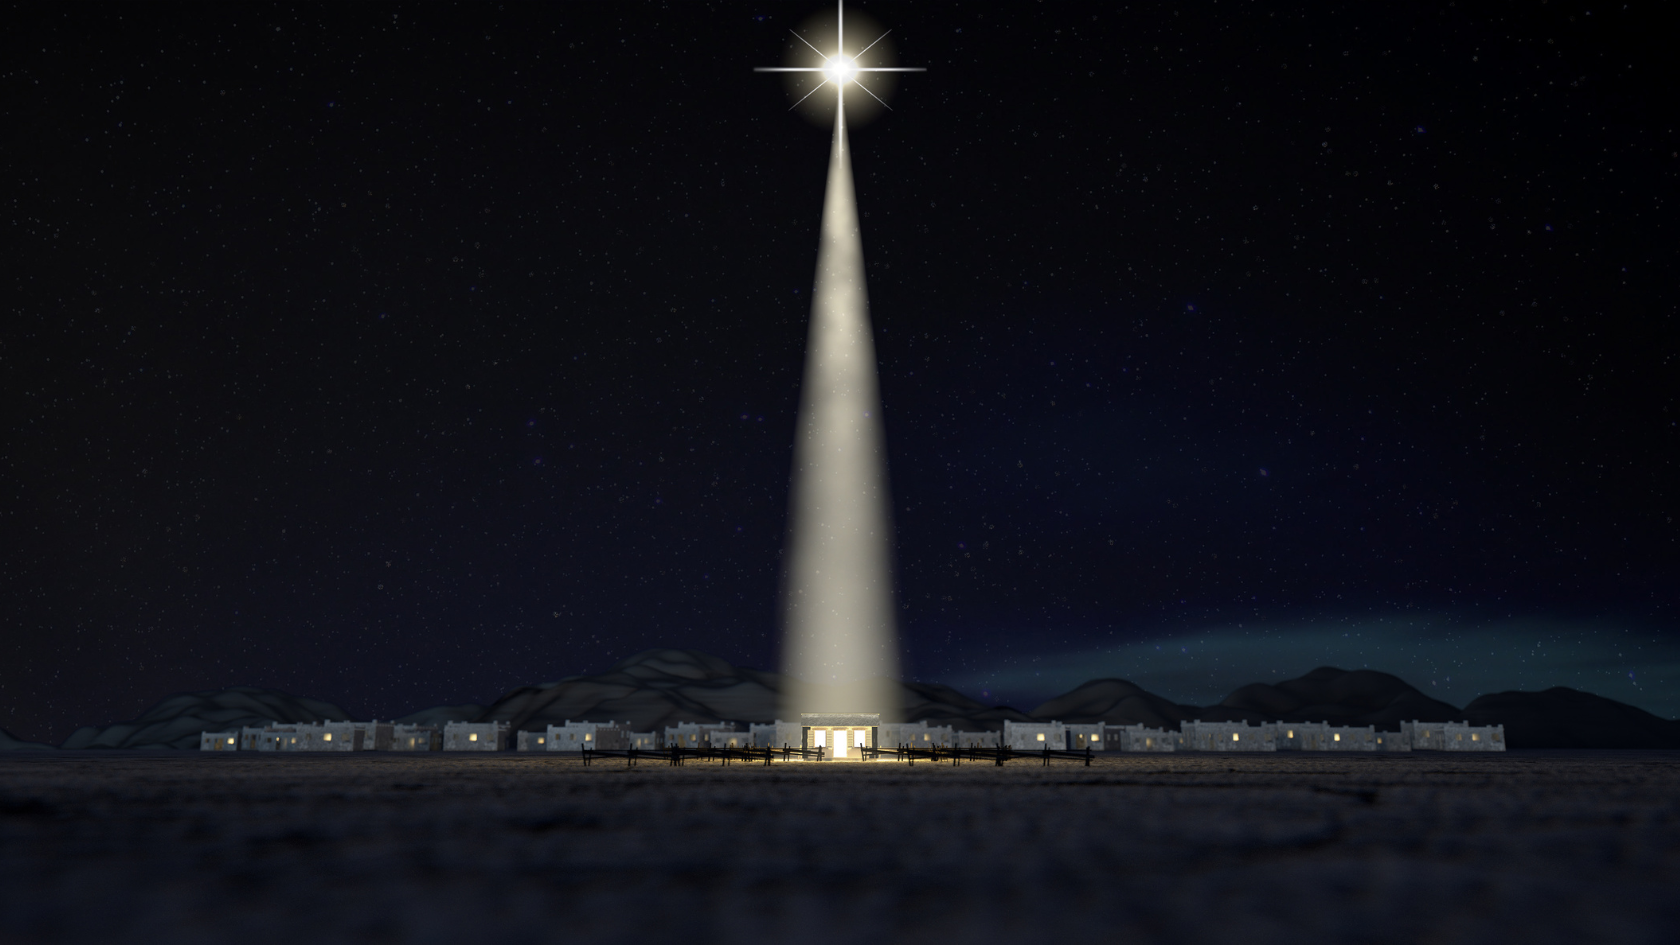 Image of the Star of Bethlehem shining down on the stable where Jesus was born.